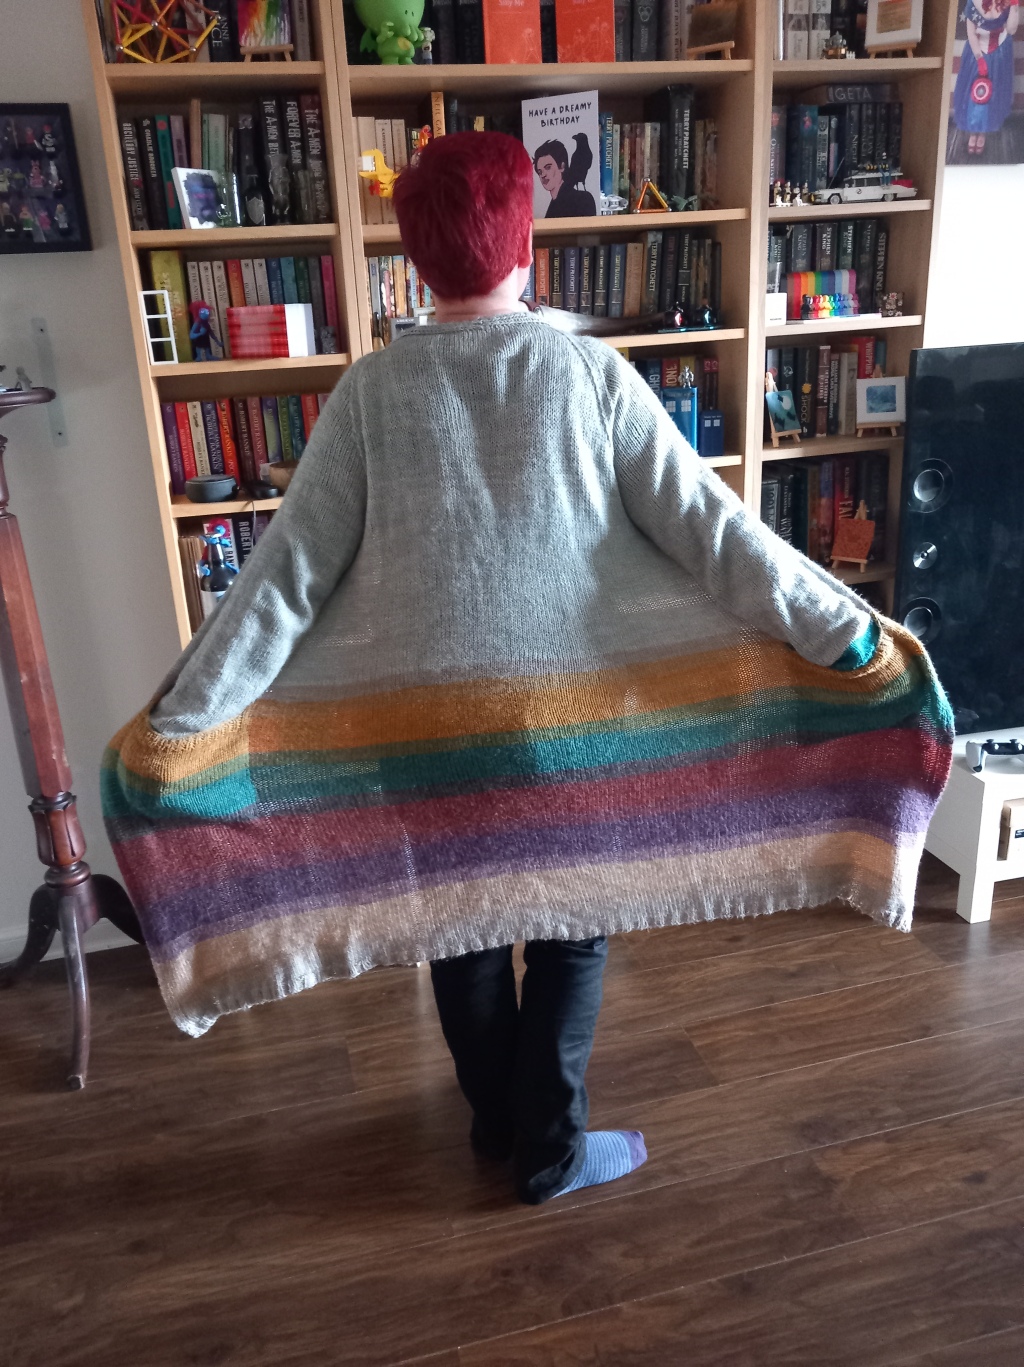 The Cardigan of Theseus: She is Done